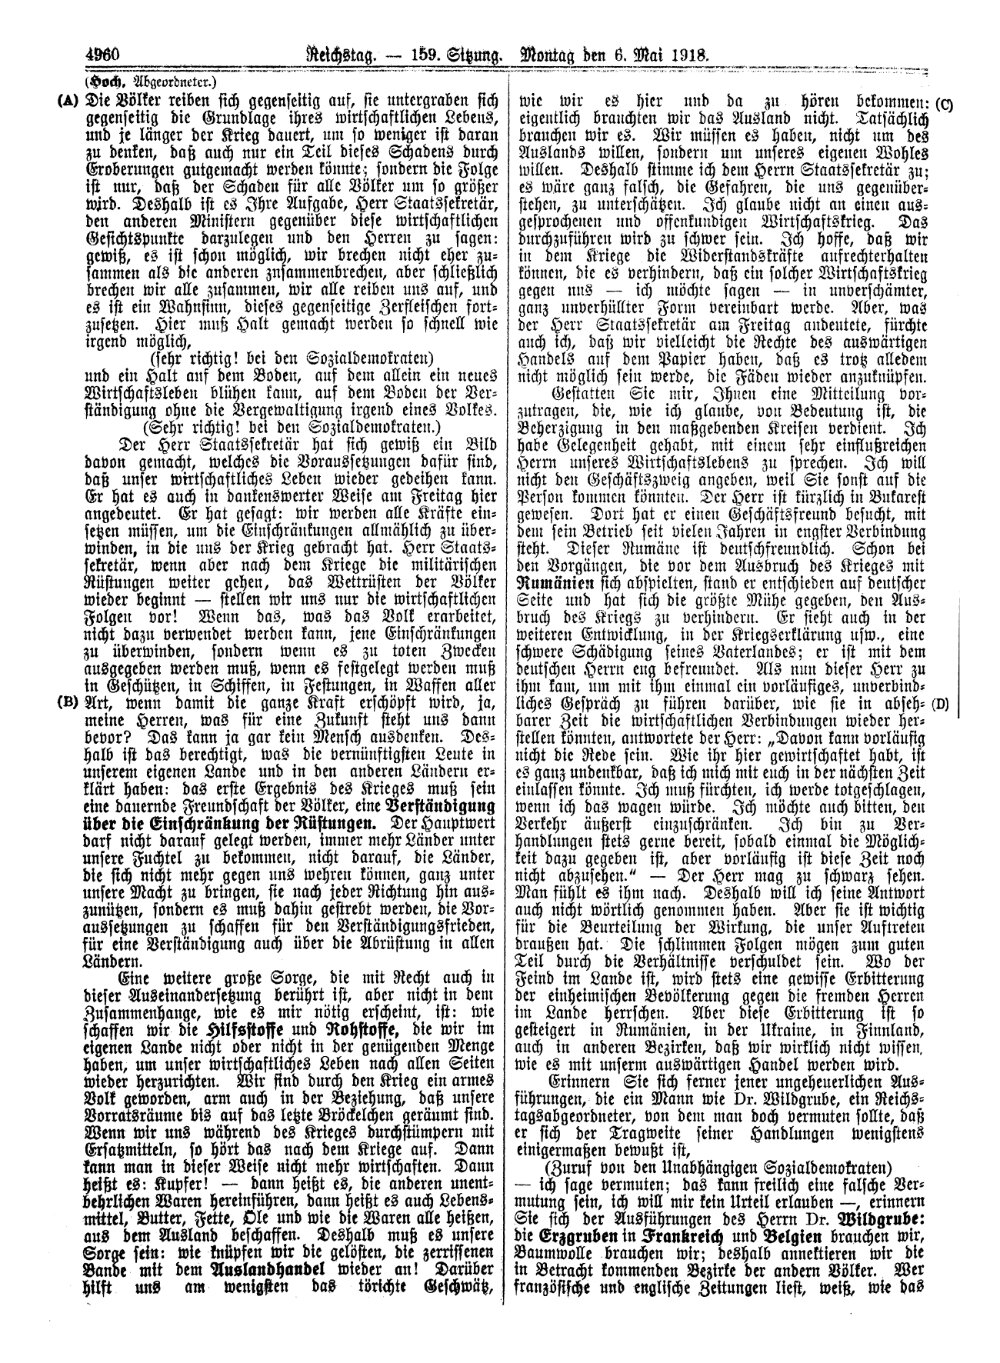 Scan of page 4960